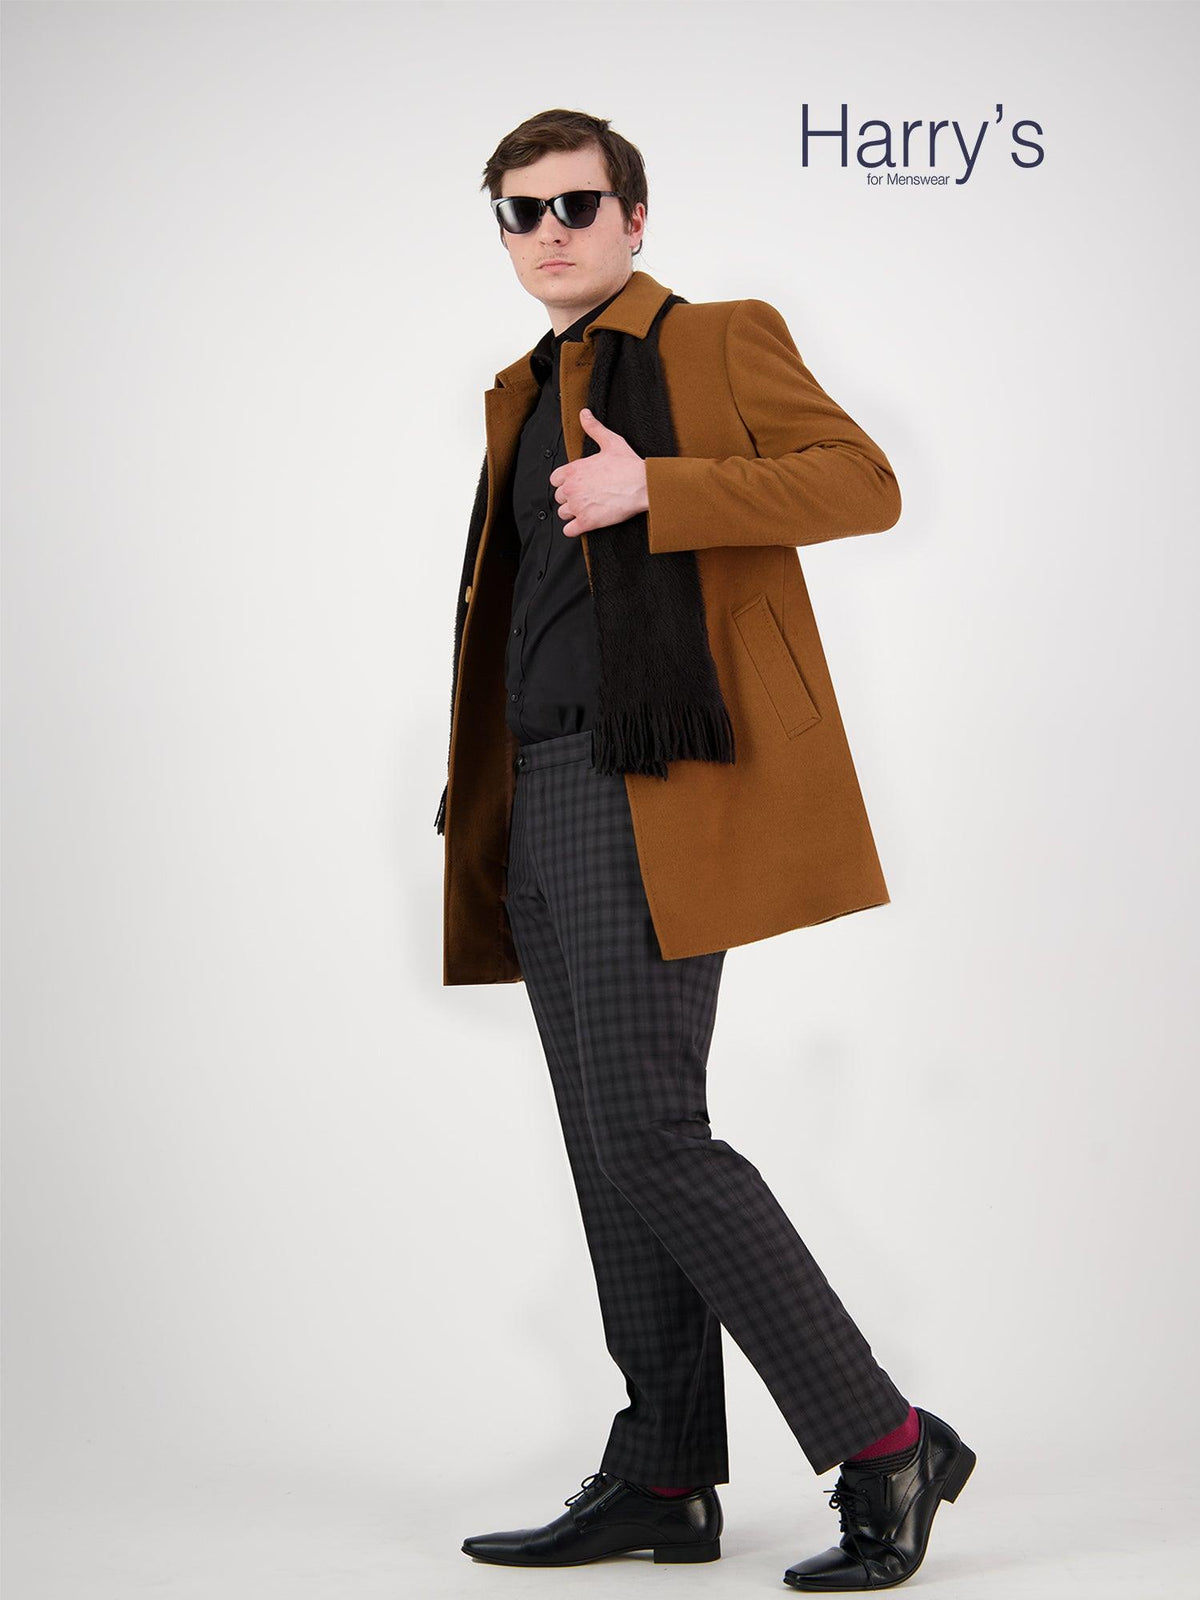 Stephen Classic Overcoat  https://harrysformenswear.com.au/products/stephen-classic-overcoat  Cashmere Overcoat By Savile Row Be ready for the cold weather in style with the Stephen Classic Overcoat from Savile Row. Luxurious wool and cashmere blend provides superior insulation and warmth and comes in Camel & Black for the perfect winter look. The classic 3/4 length ensures the cold stays outside and your style…